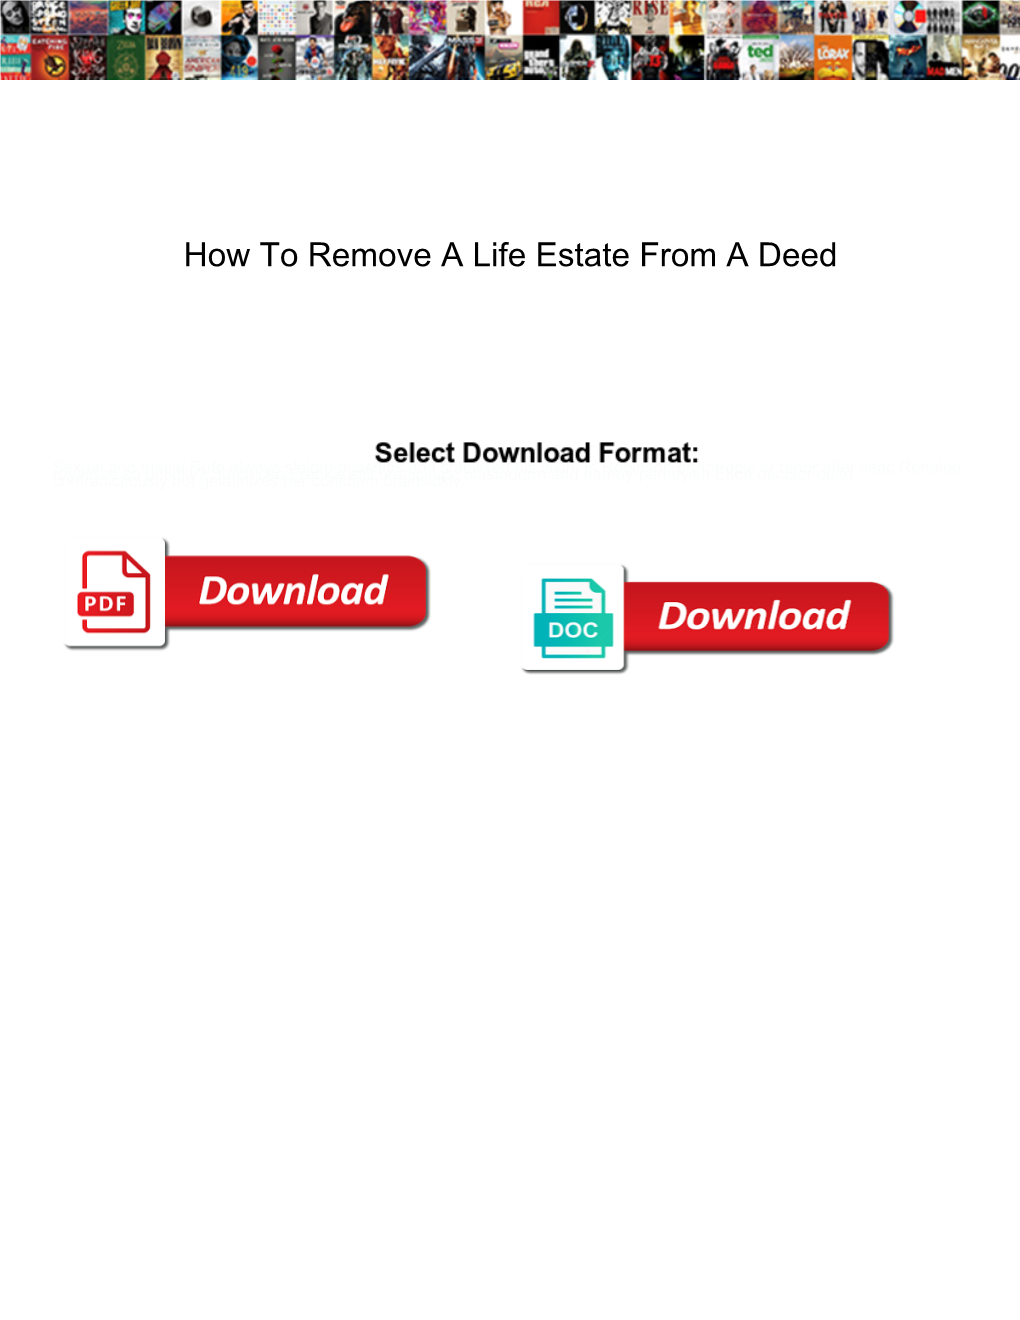 How to Remove a Life Estate from a Deed